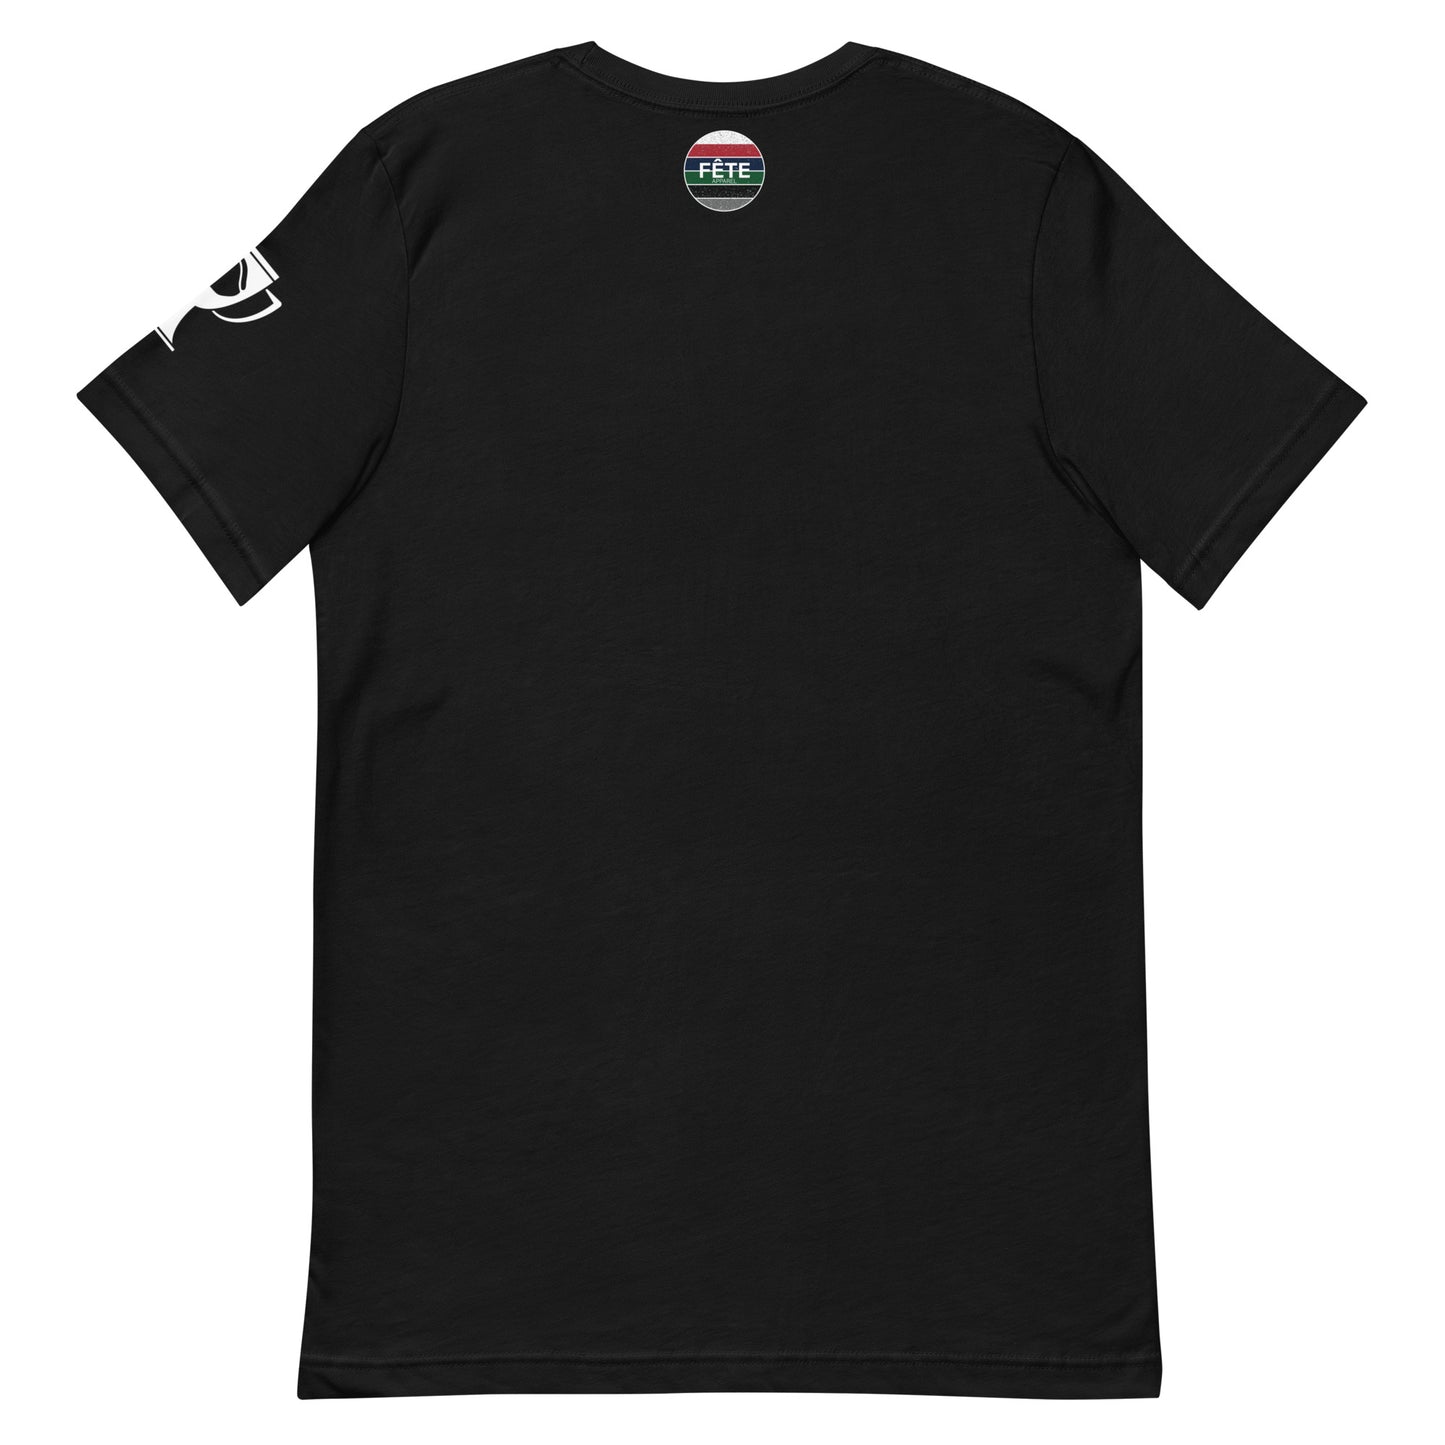 Men's T-Shirt "BARN DAD" in Basic Black, French Navy, Canadian Red, Racing Green or Storm Grey